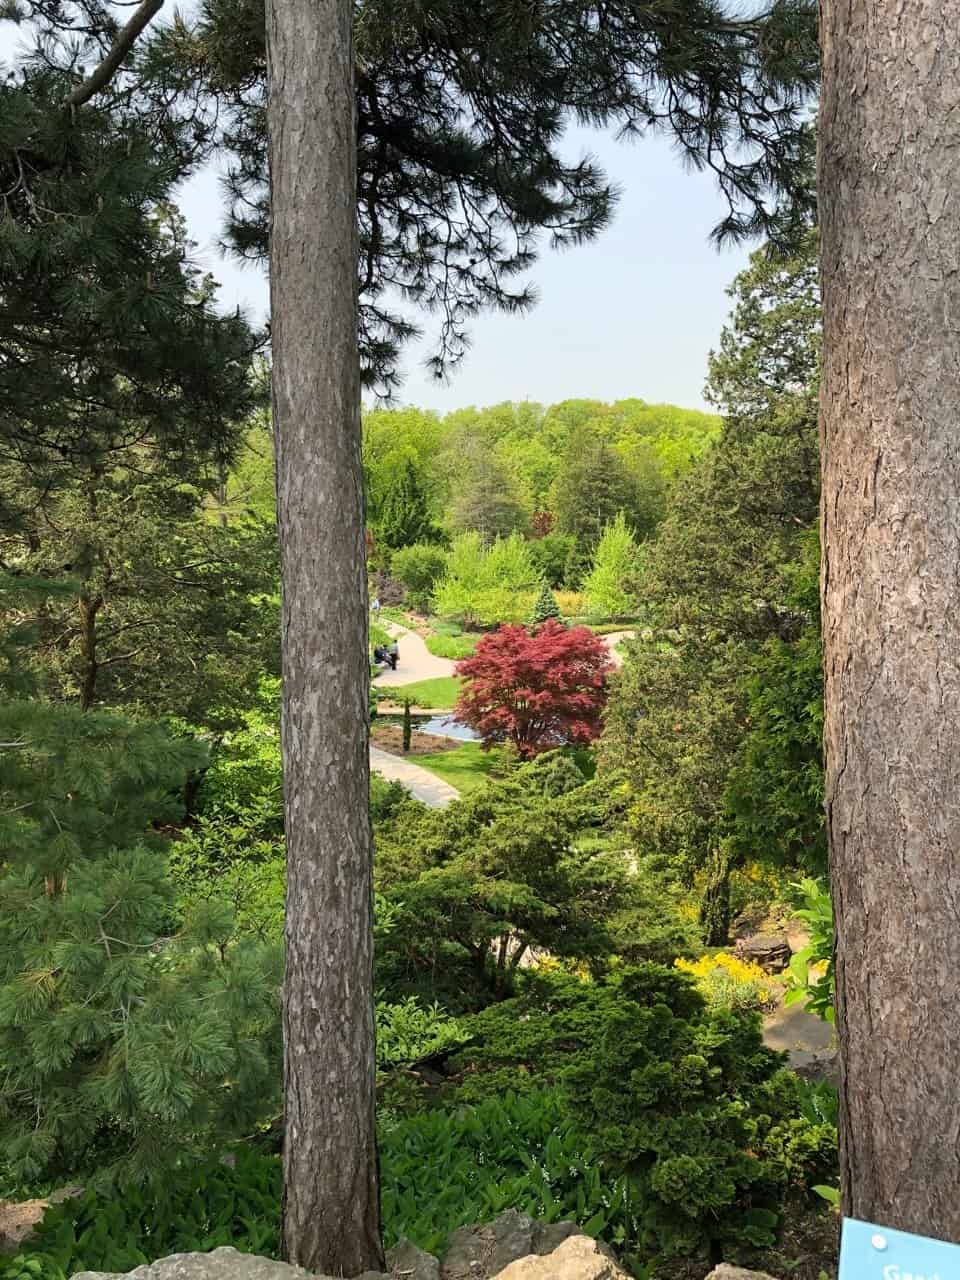 Looking down into the Rock Garden at Royal Botanical Gardens in Burlington, Ontario, in late May 2019.